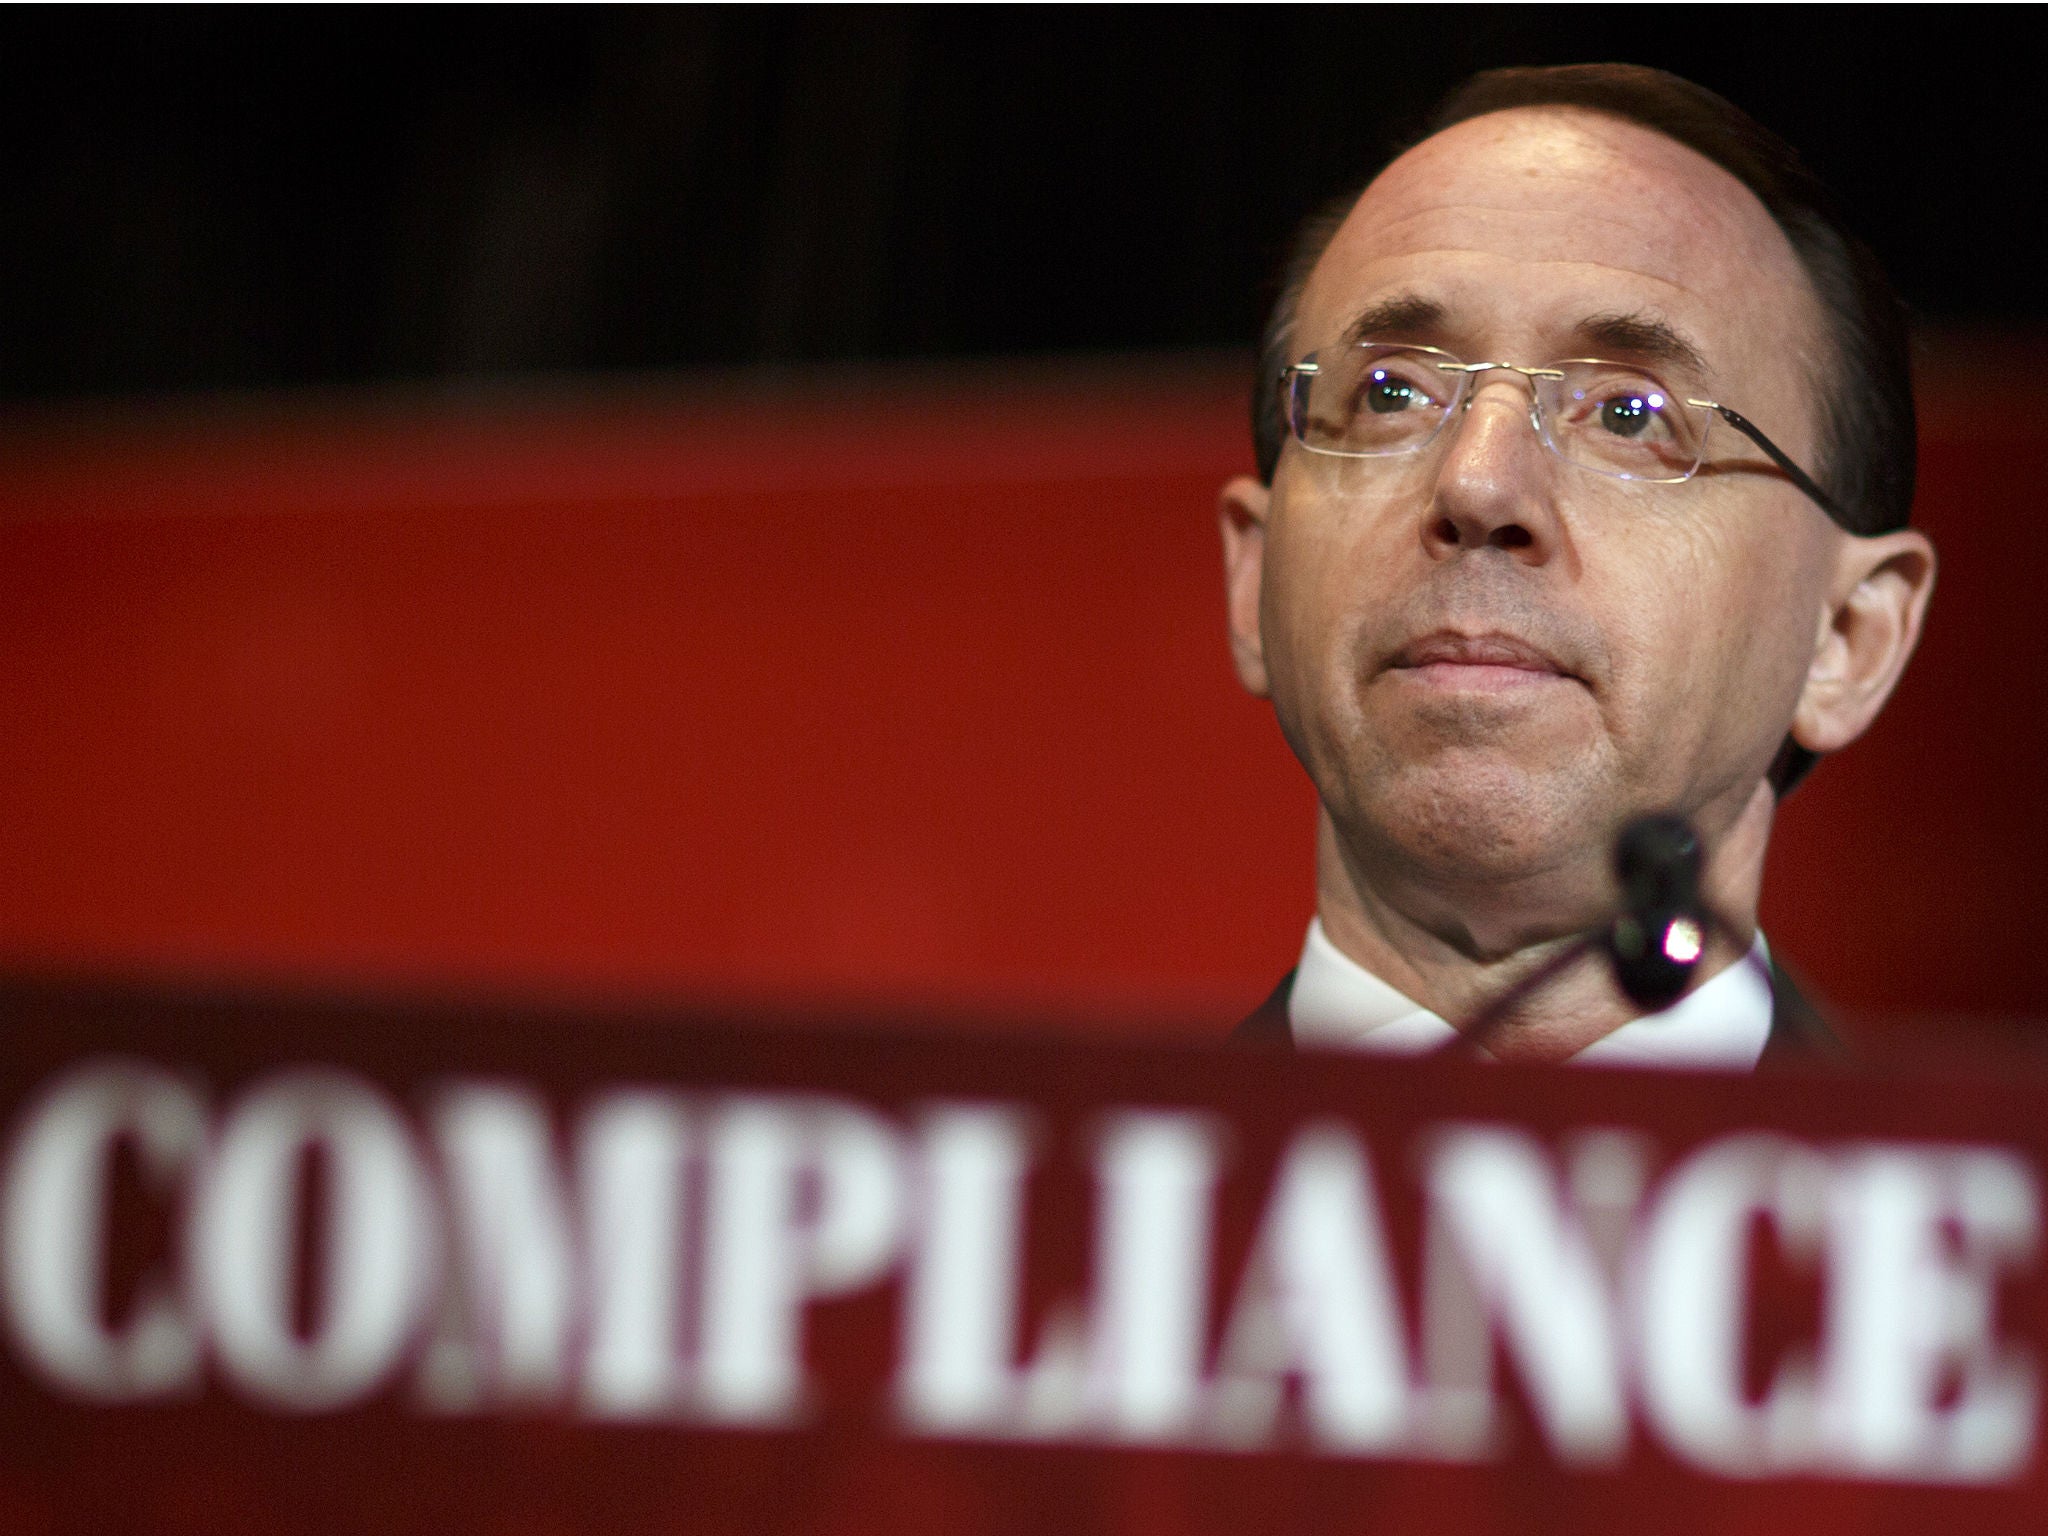 Deputy attorney general Rod Rosenstein said the Department of Justice would examine whether anyone sought to 'infiltrate or surveil participants in a presidential campaign for inappropriate purposes'